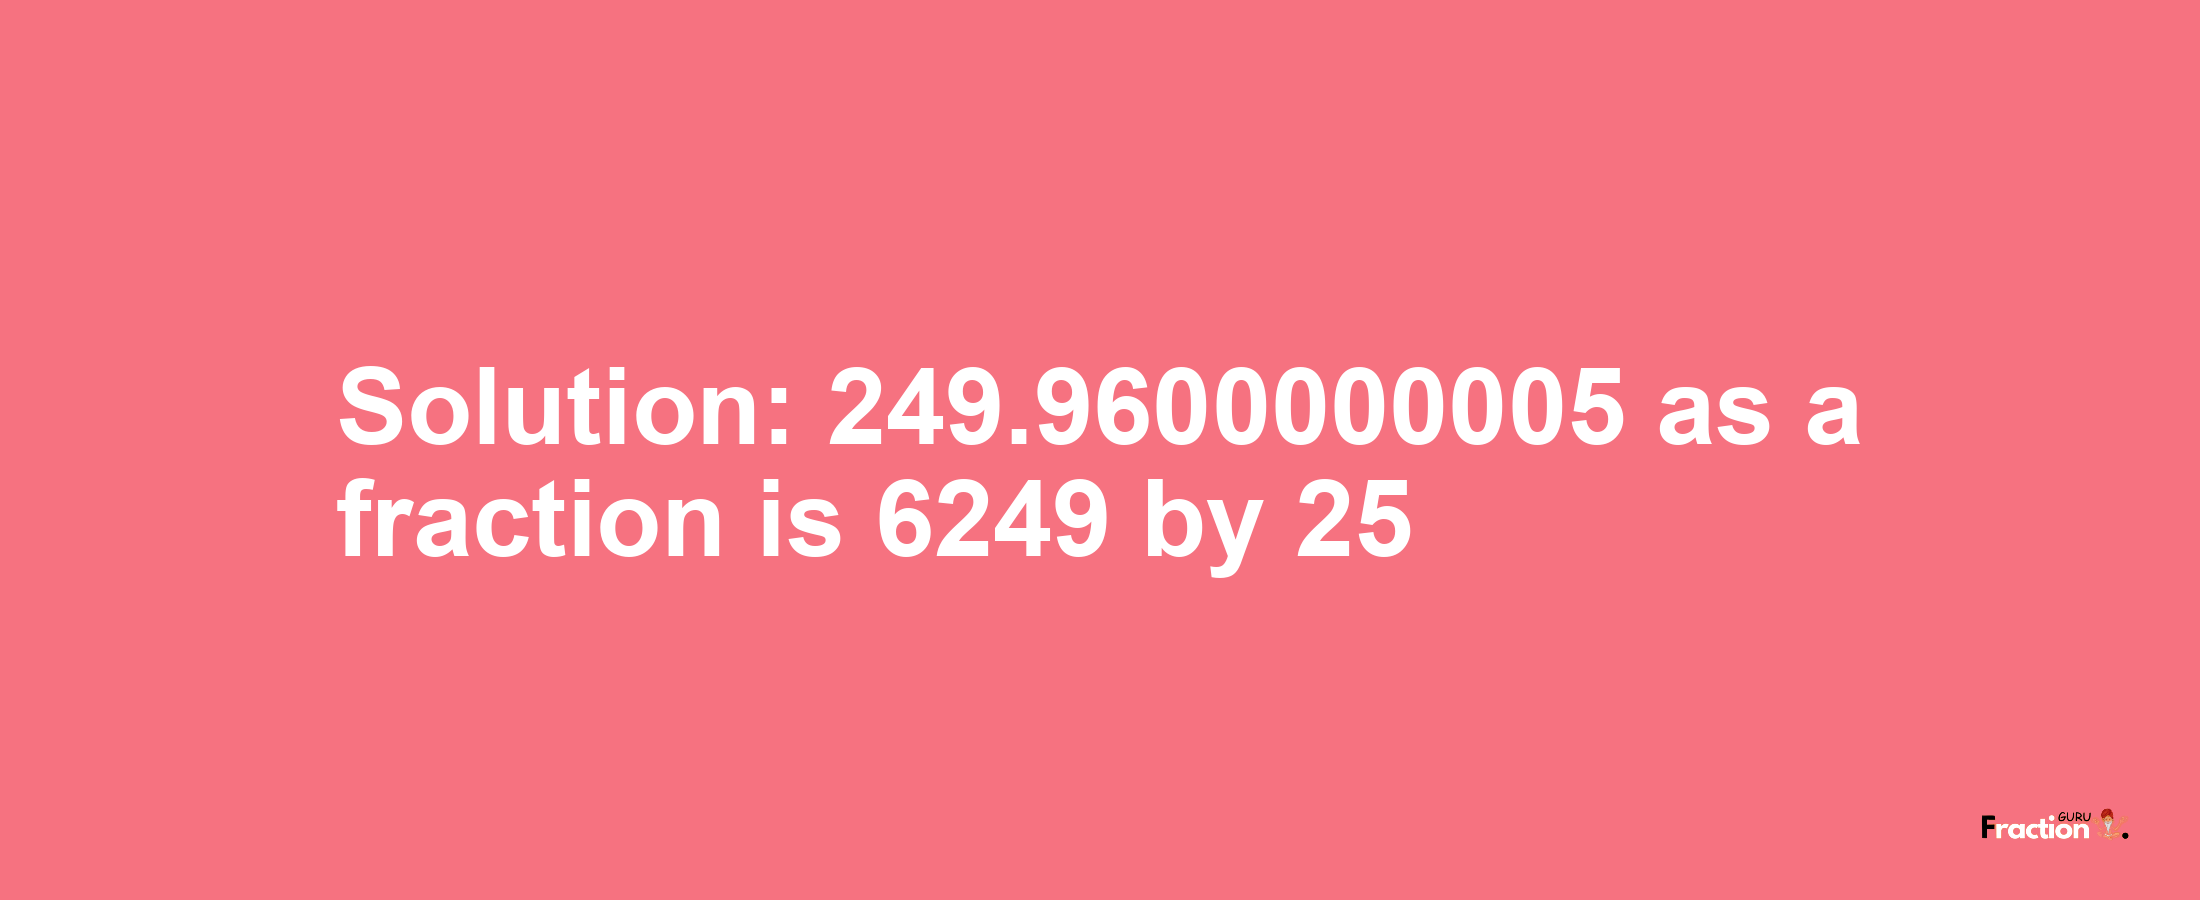 Solution:249.9600000005 as a fraction is 6249/25